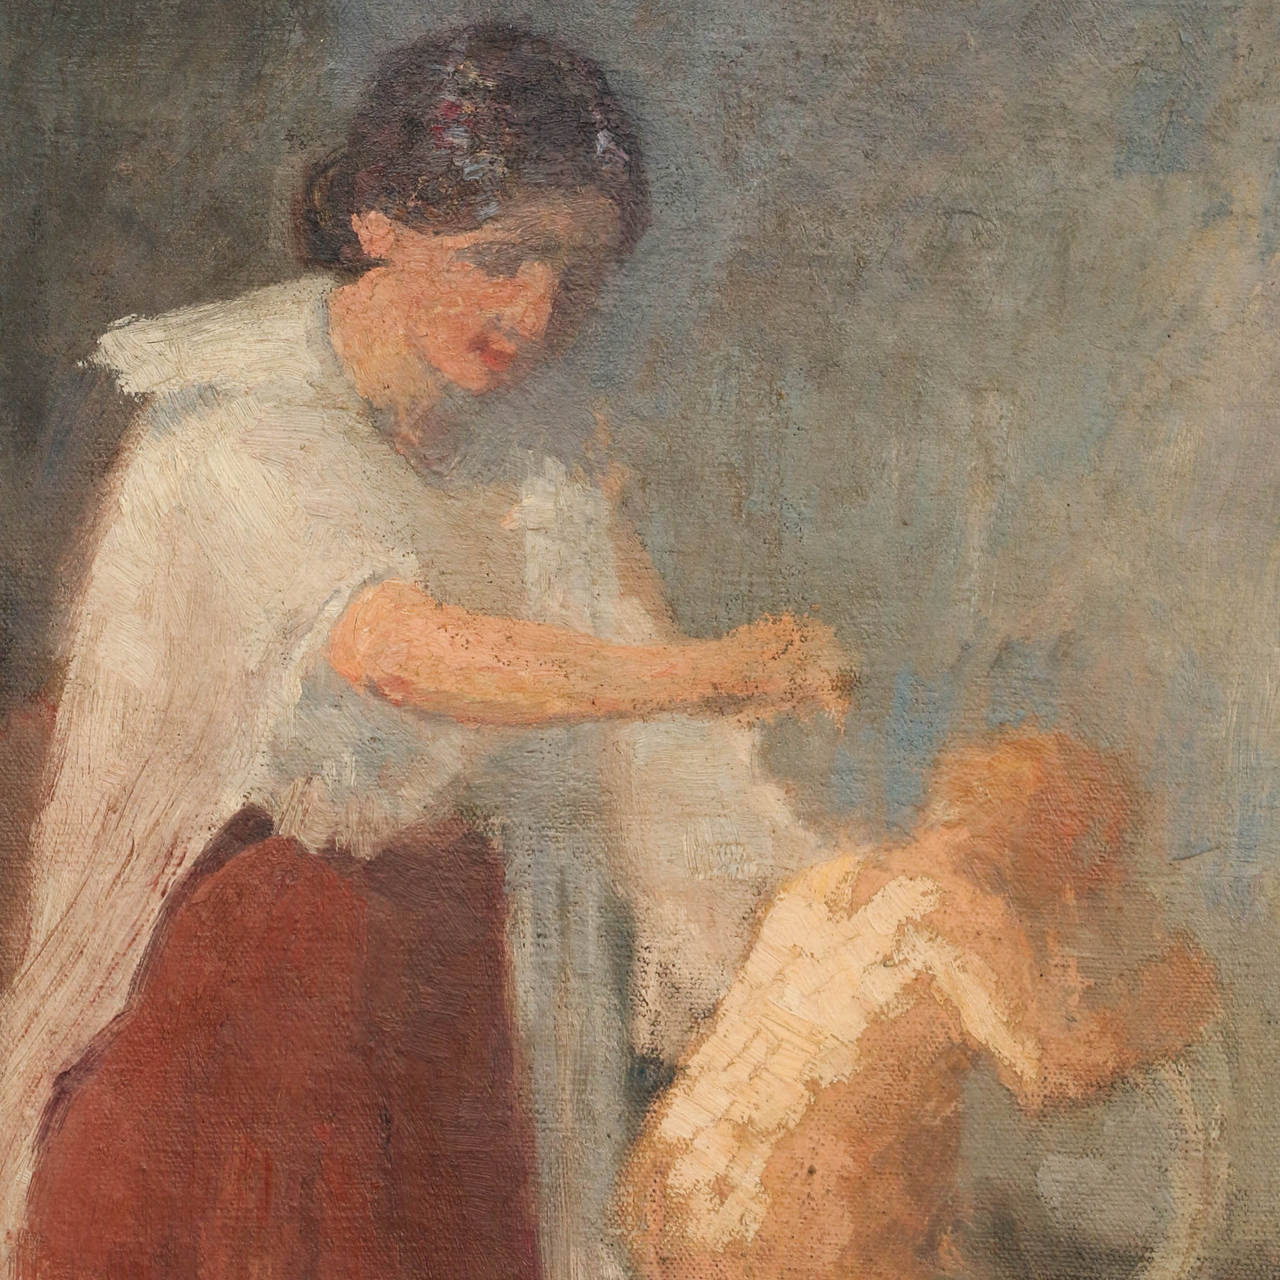 Original oil on canvas by Henrik Schouboe. Mother dressed in white and red, bathing child on a chair. They are presumably the artist's wife and daughter. Signed with monogram.